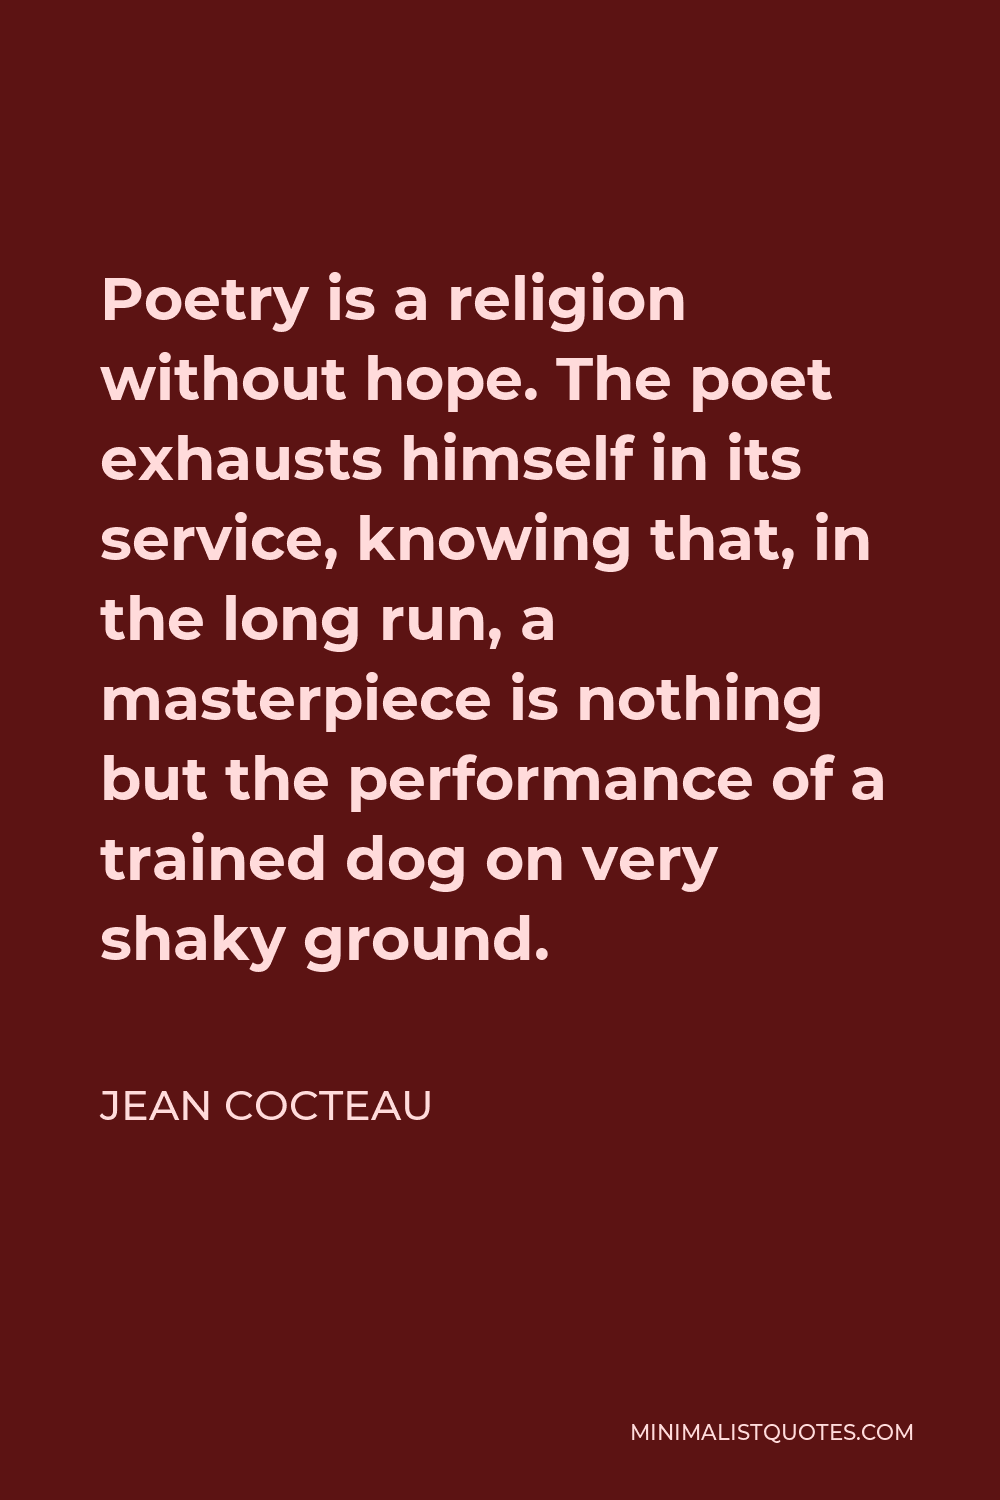 Jean Cocteau Quote - Poetry is a religion without hope. The poet exhausts himself in its service, knowing that, in the long run, a masterpiece is nothing but the performance of a trained dog on very shaky ground.